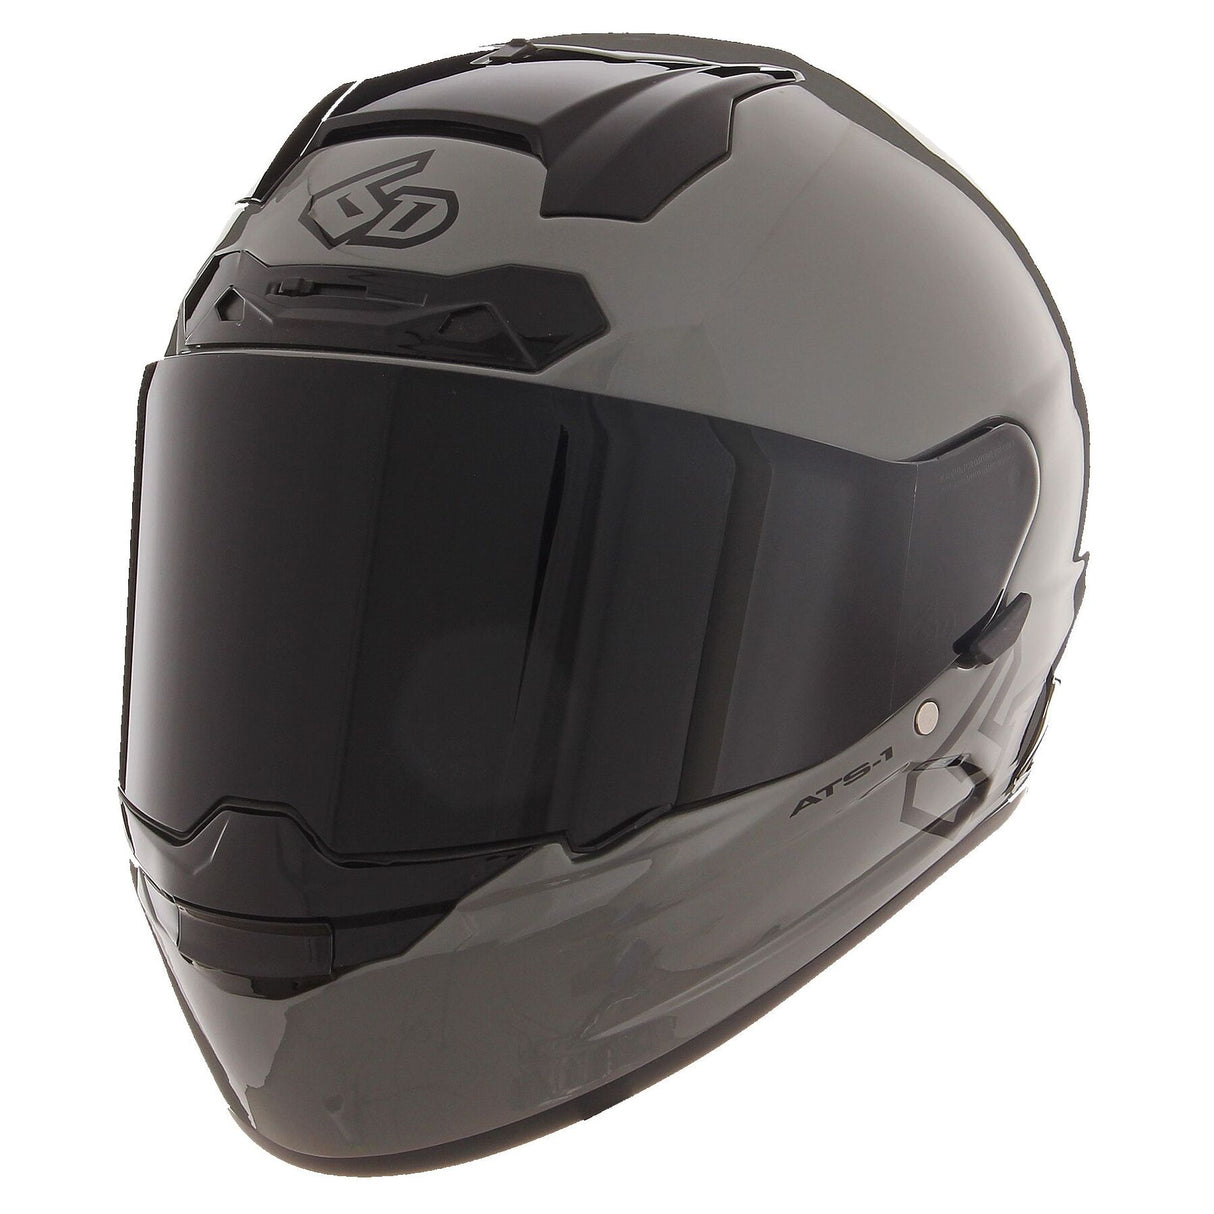 6D ATS-1R Motorcycle Helmet - Solid Gloss Cement/Grey